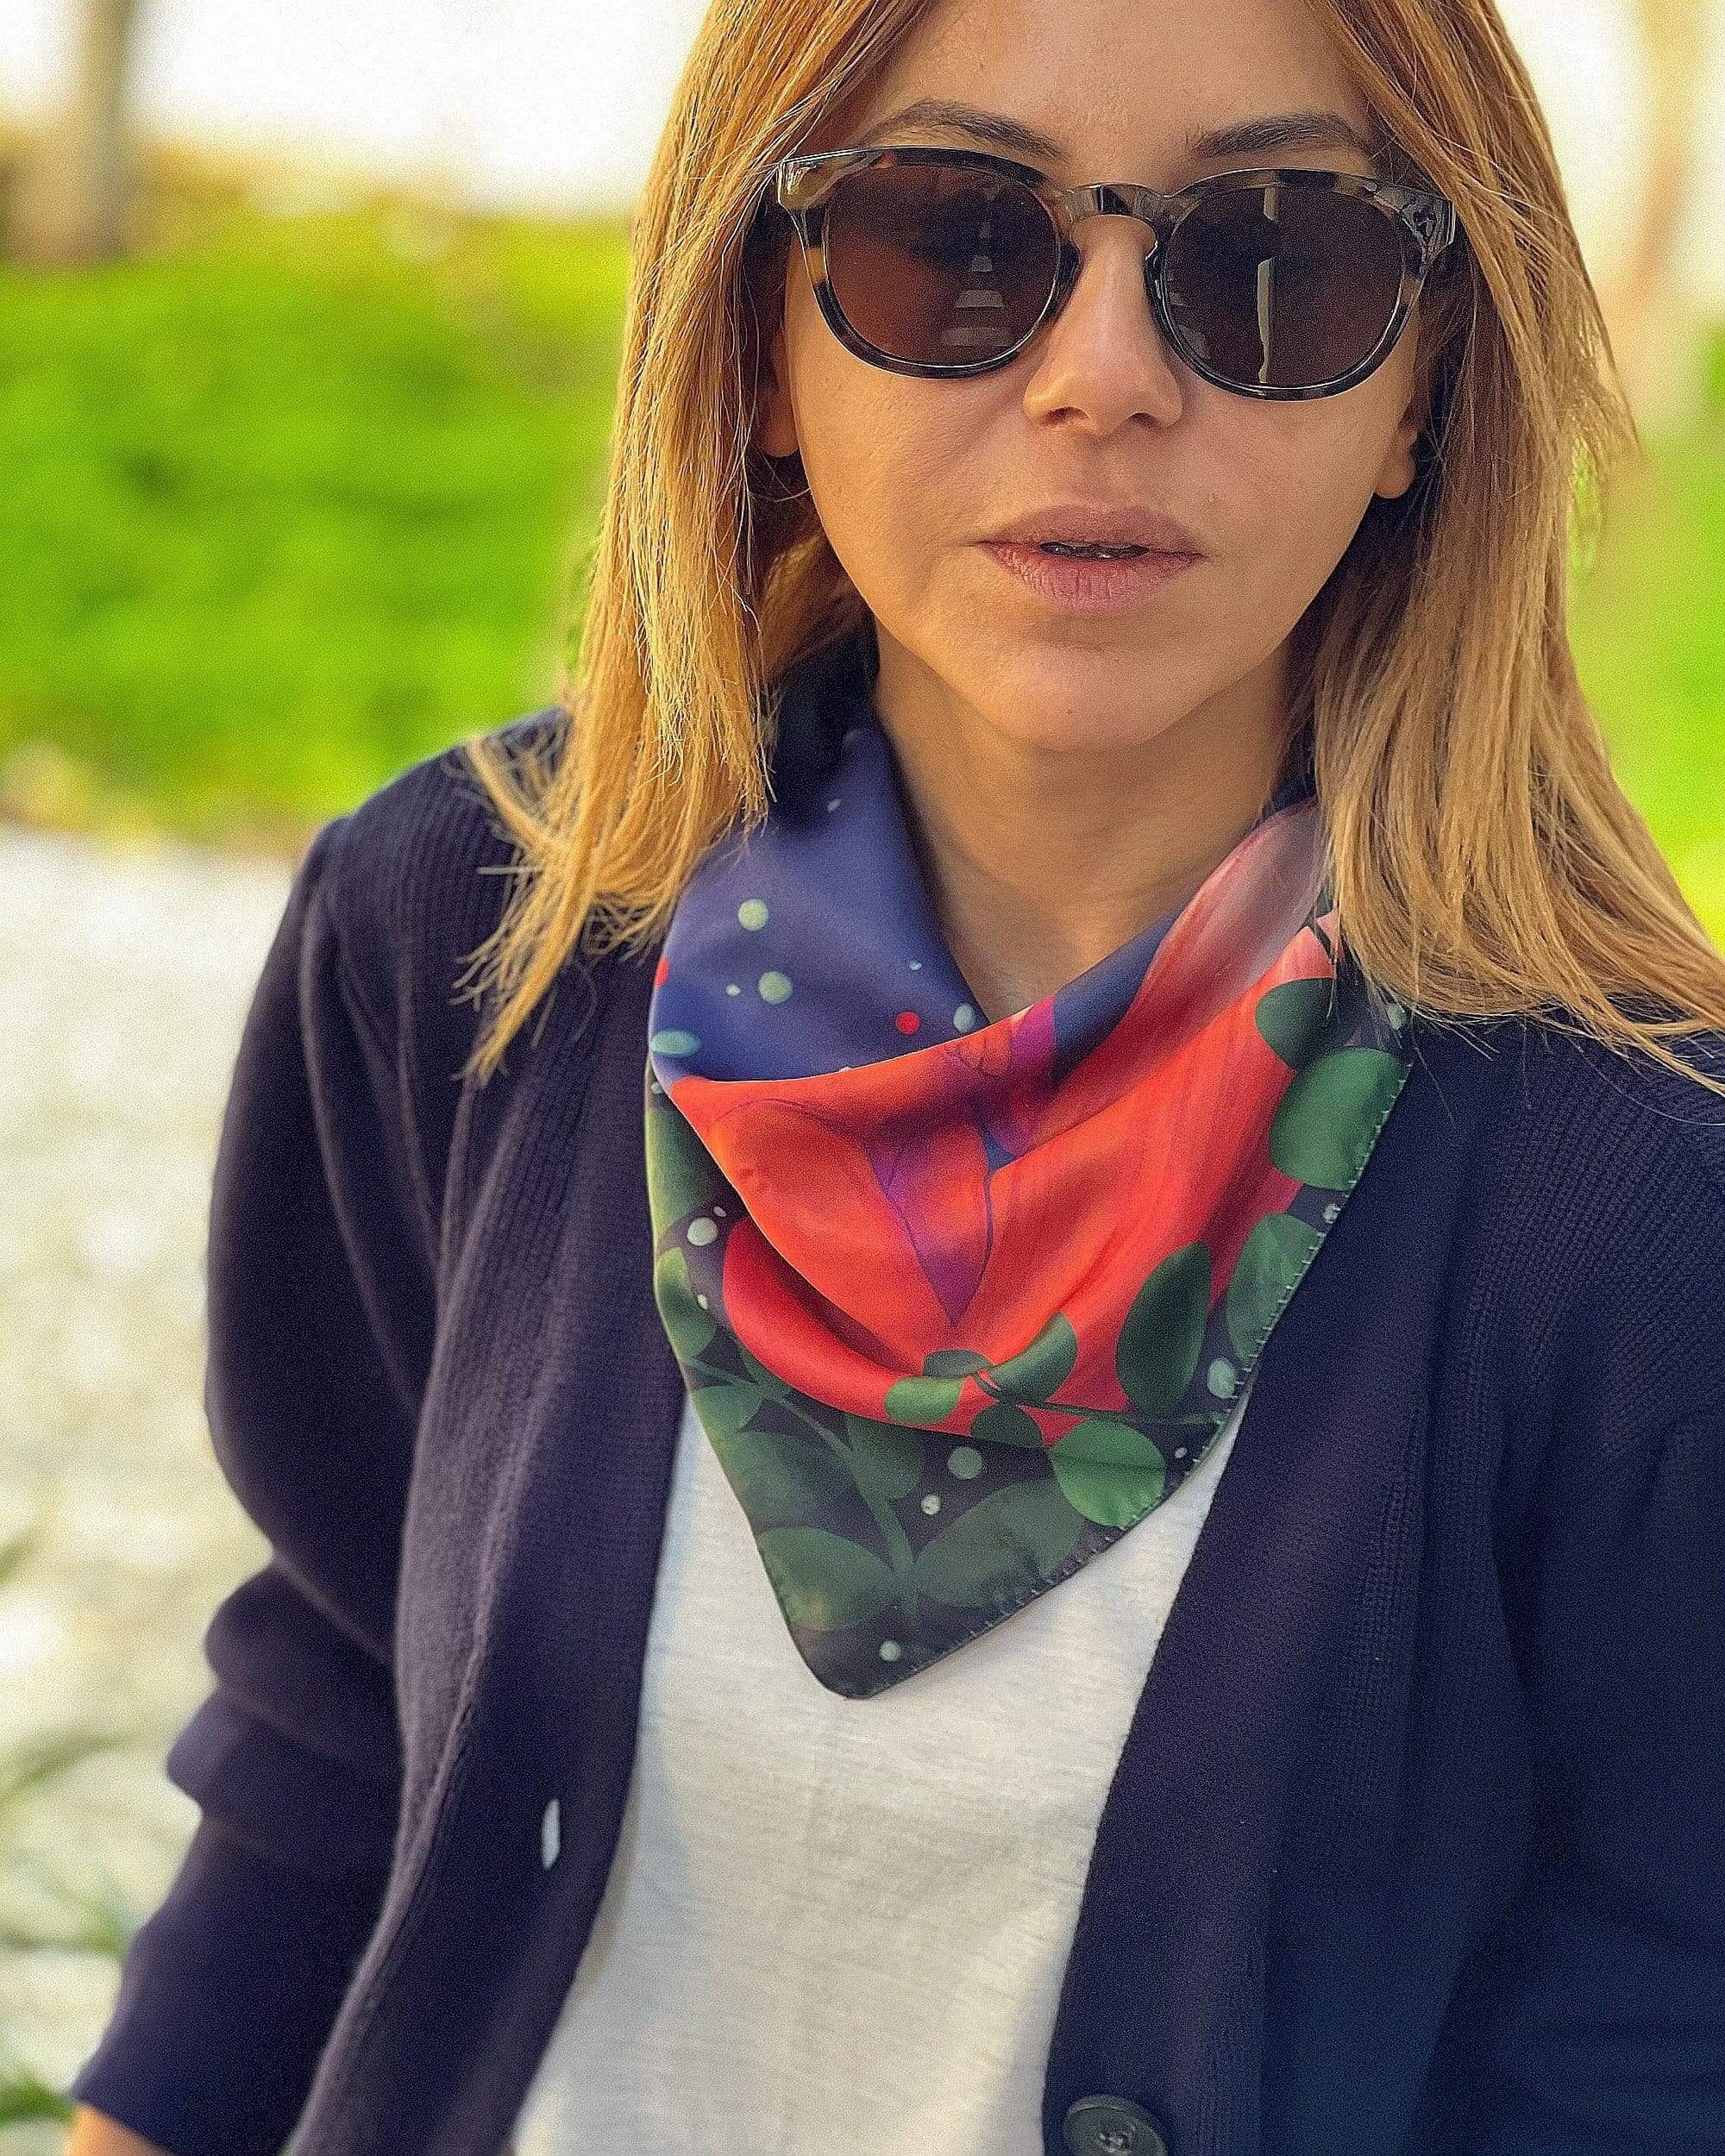 If you are looking for the perfect gift for a special woman in your life, then look no further than our animal pattern satin scarf. Made with utmost care and precision, this scarf is sure to make her smile.